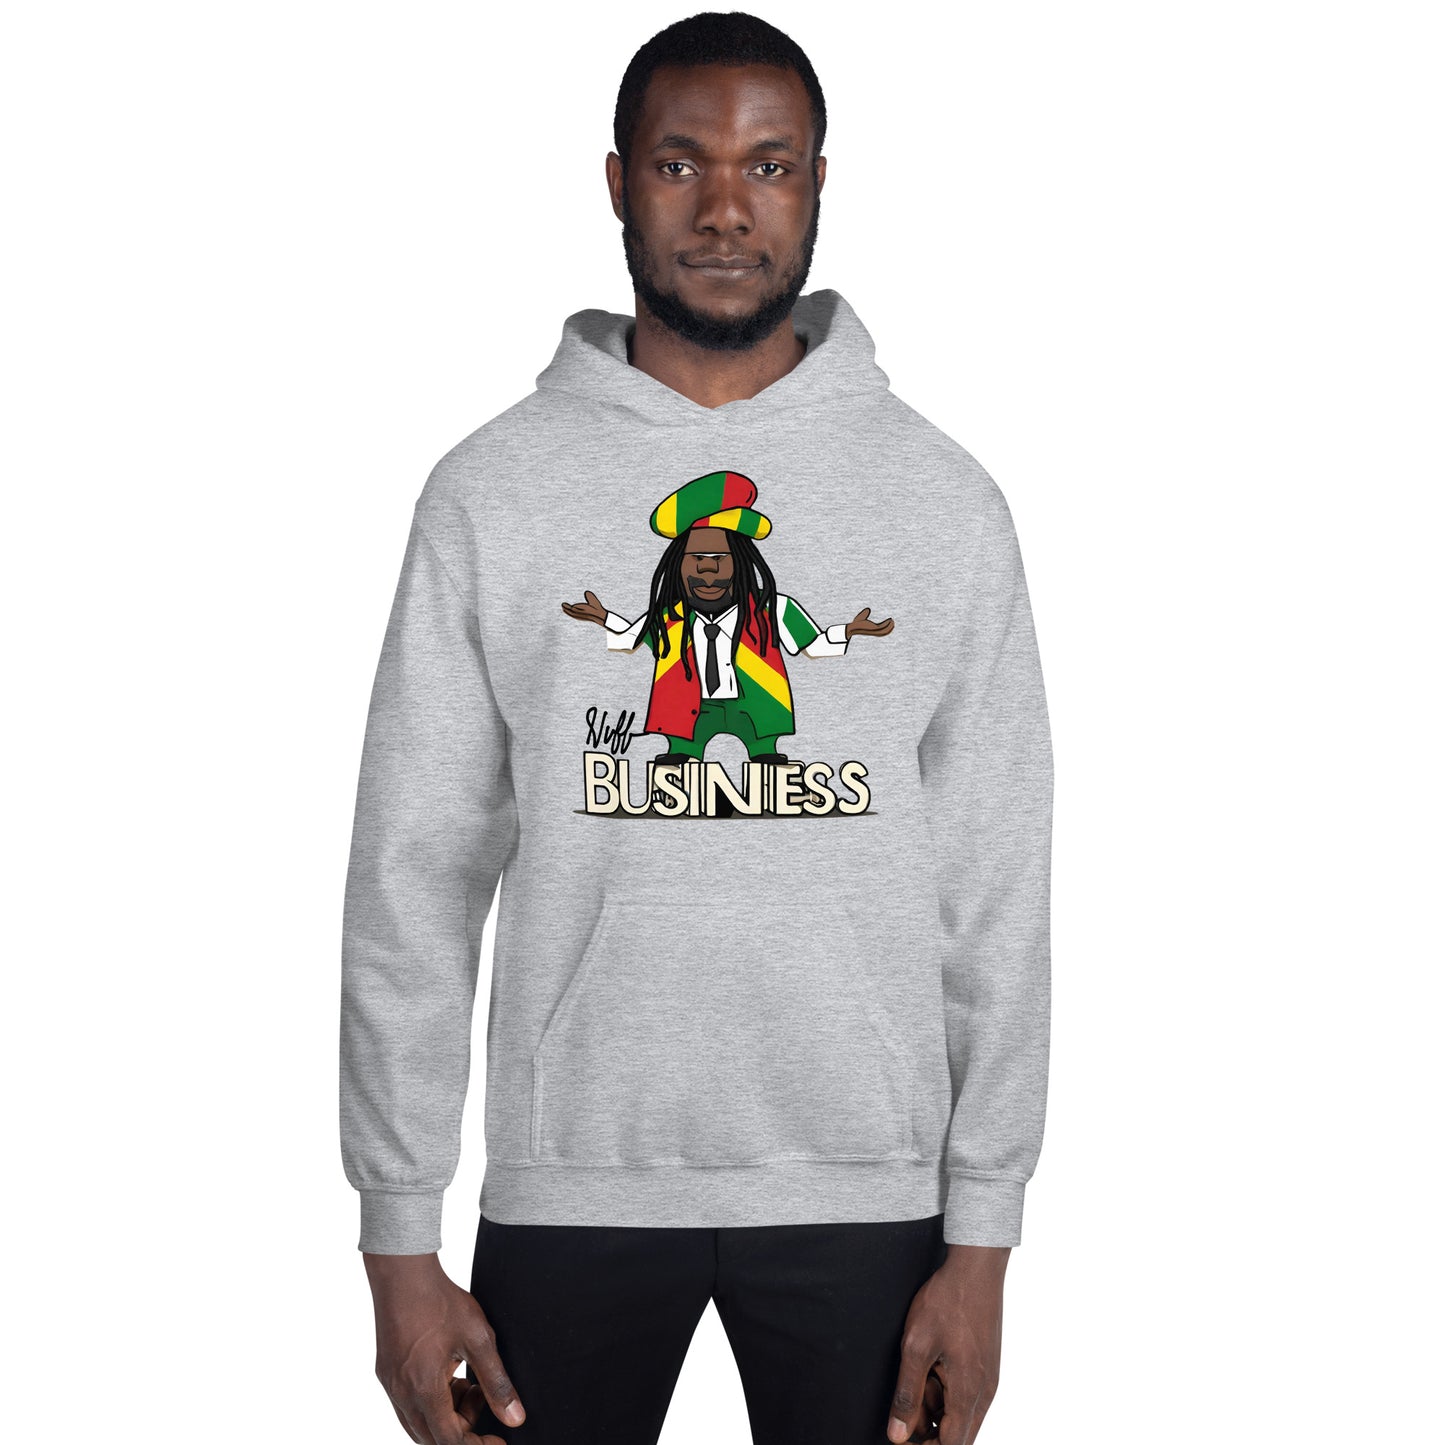 Stand on NUFF Business - Men's Hoodie (BN)